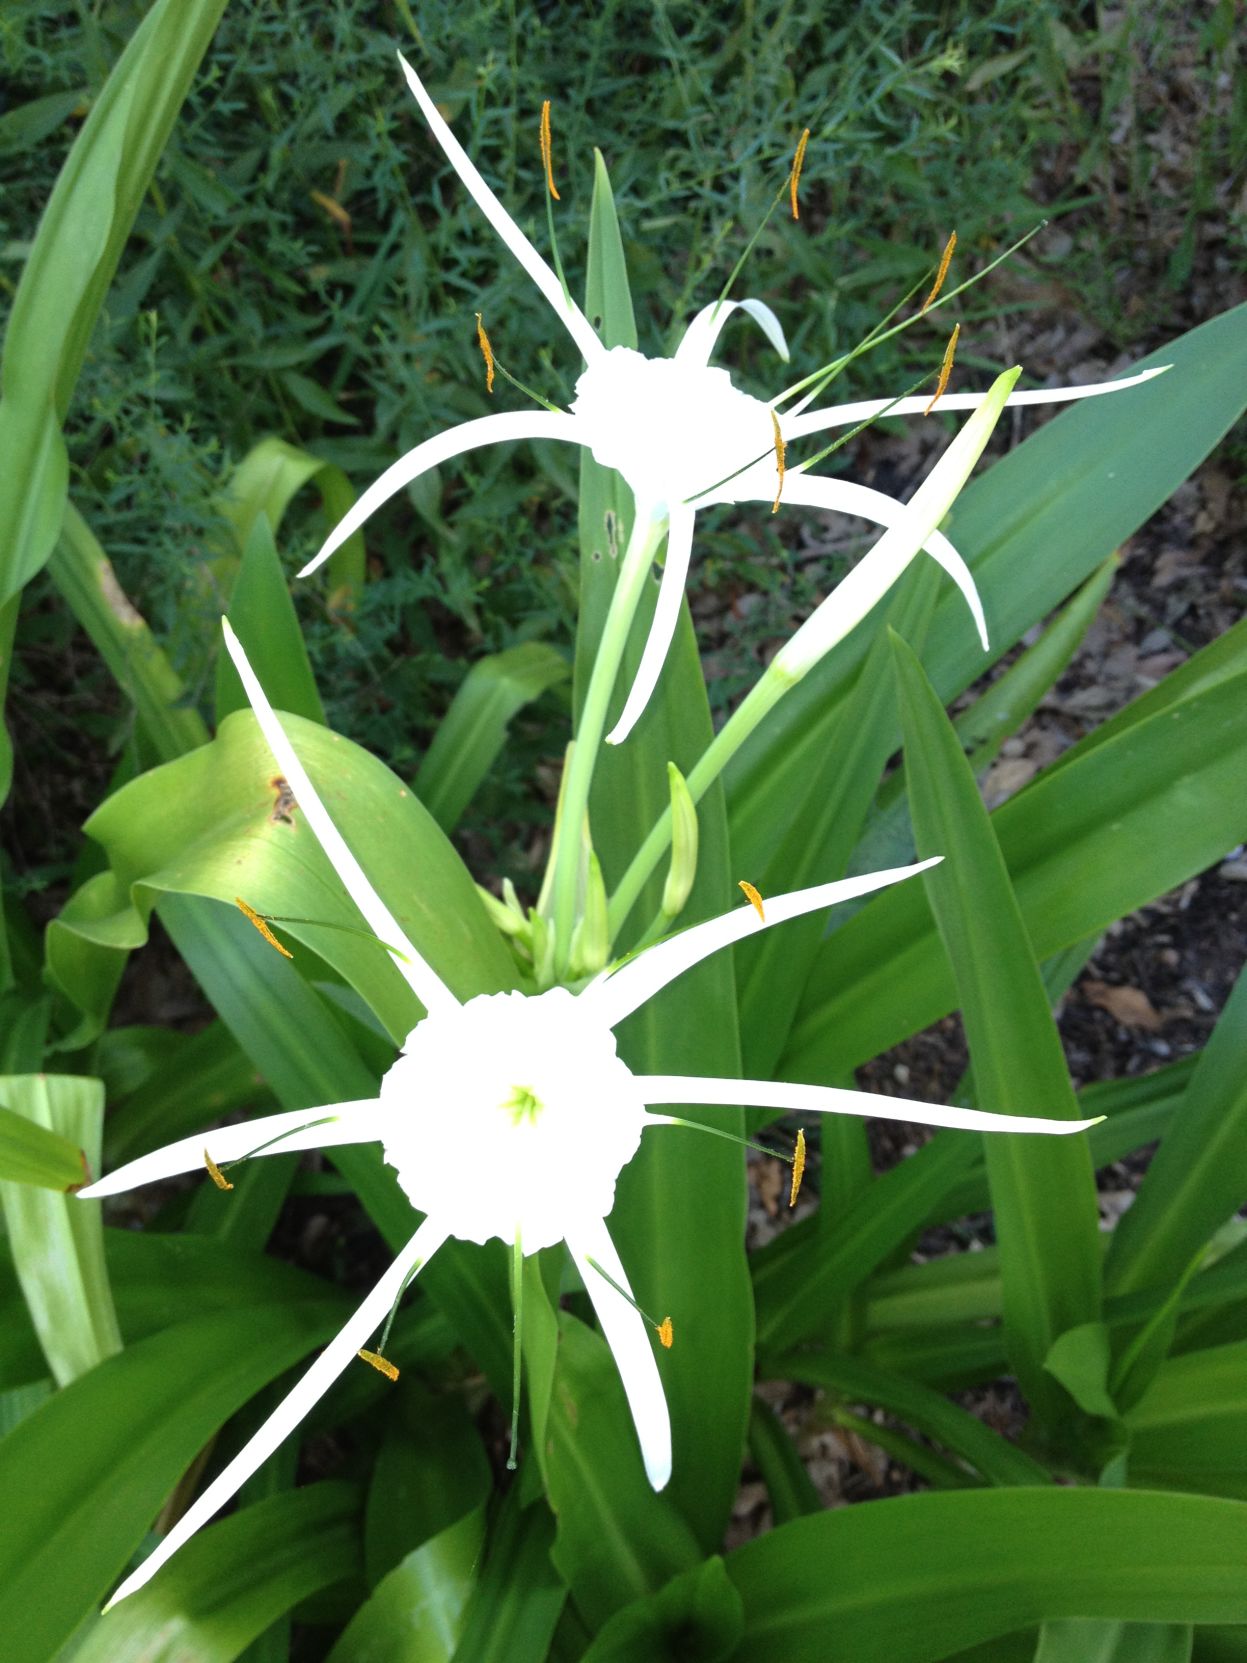 Eagle Rock blooming-size bulb NEW JUMBO Crinum Lily 